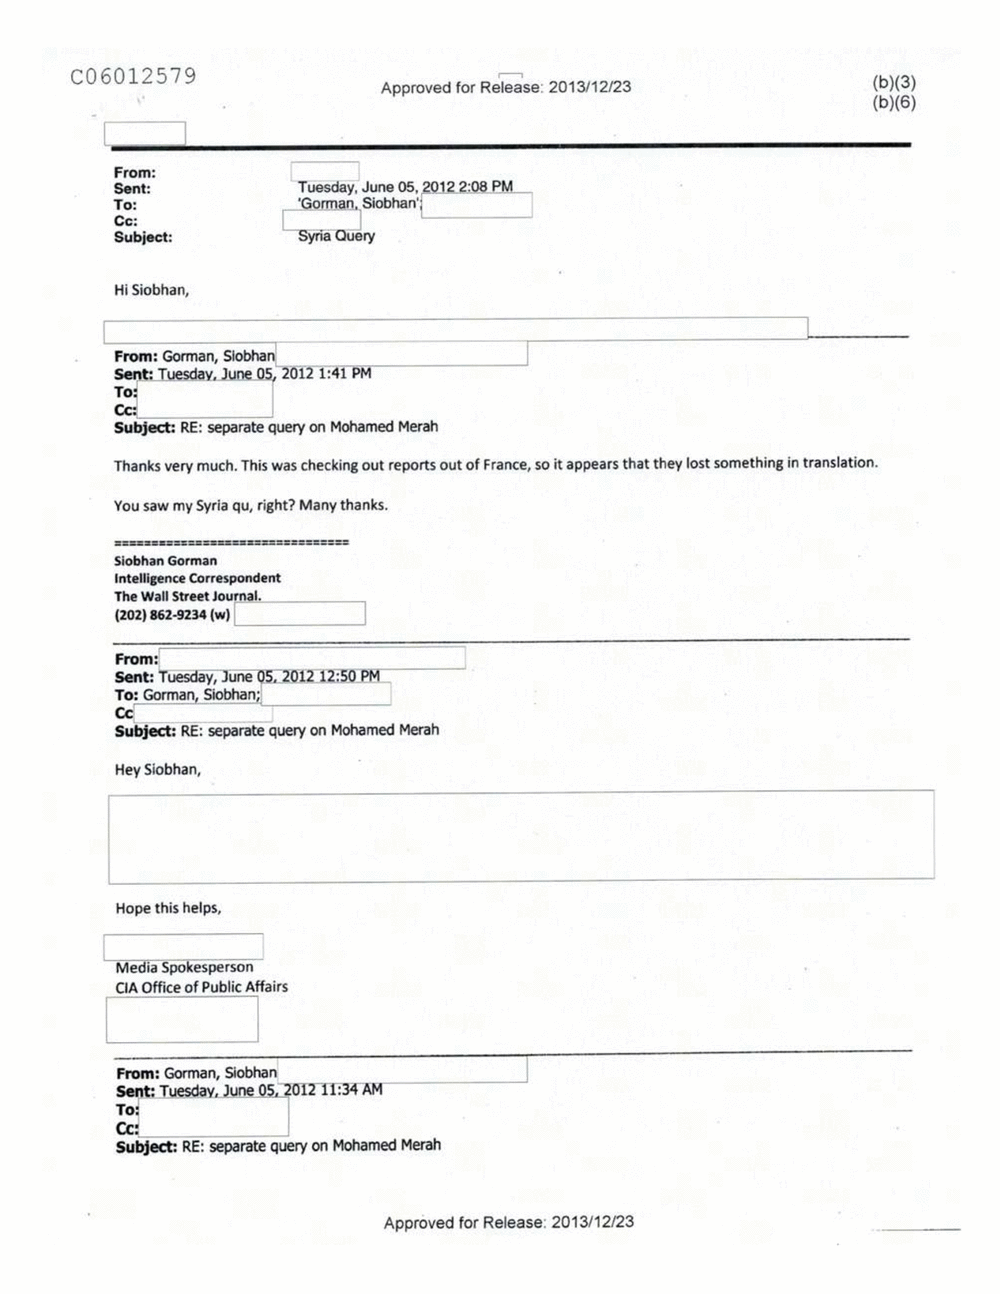 Page 115 from Email Correspondence Between Reporters and CIA Flacks